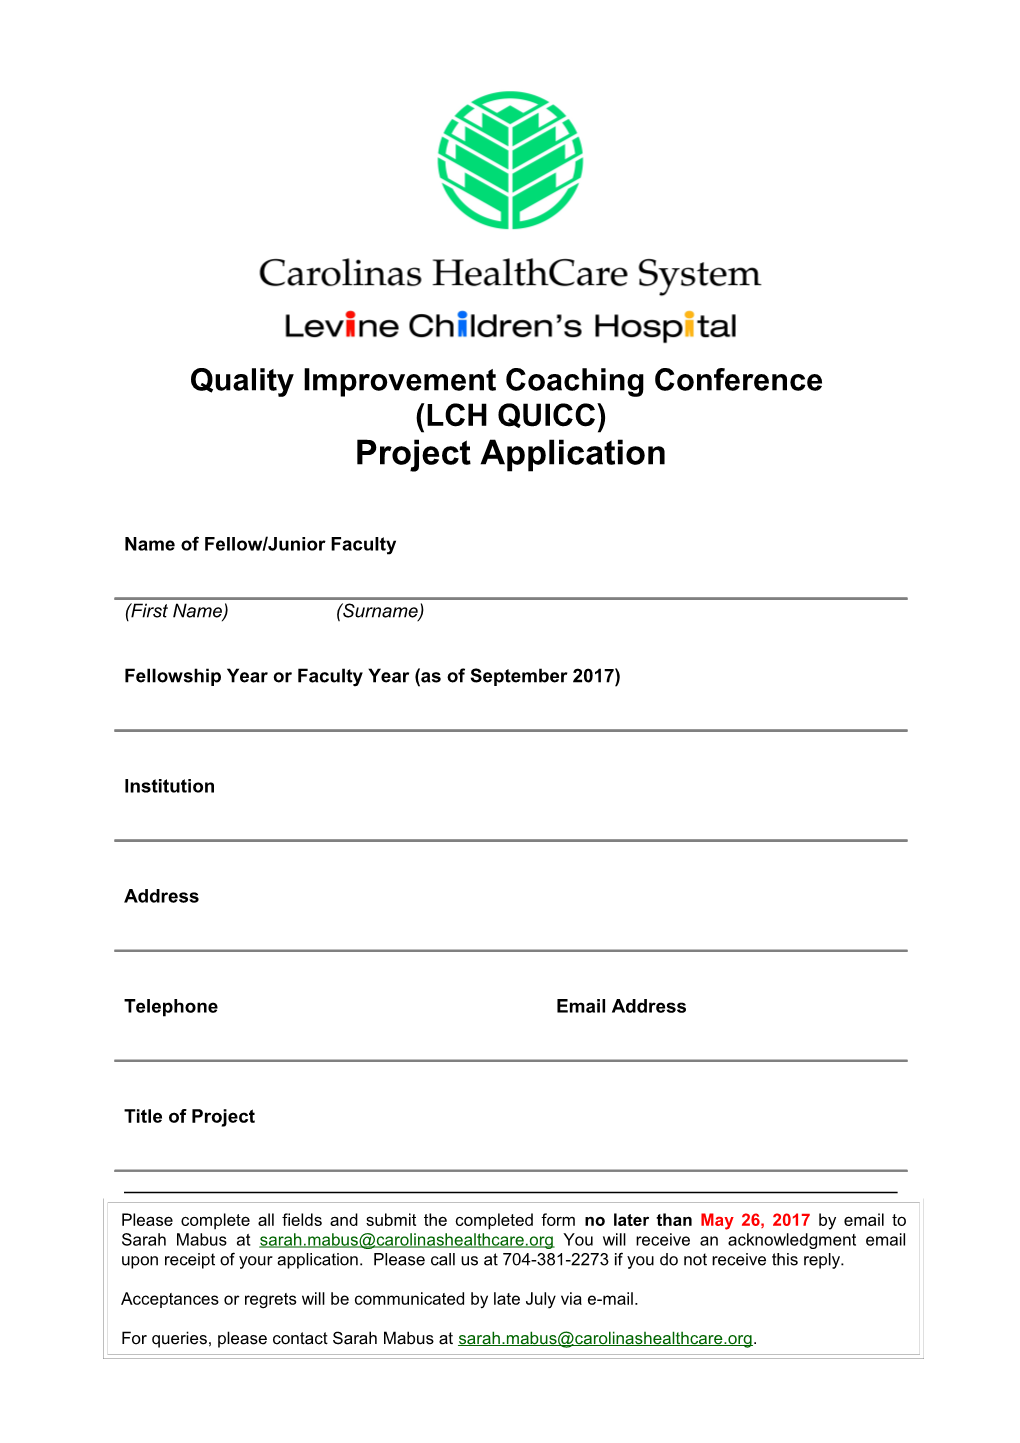 Quality Improvement Coaching Conference